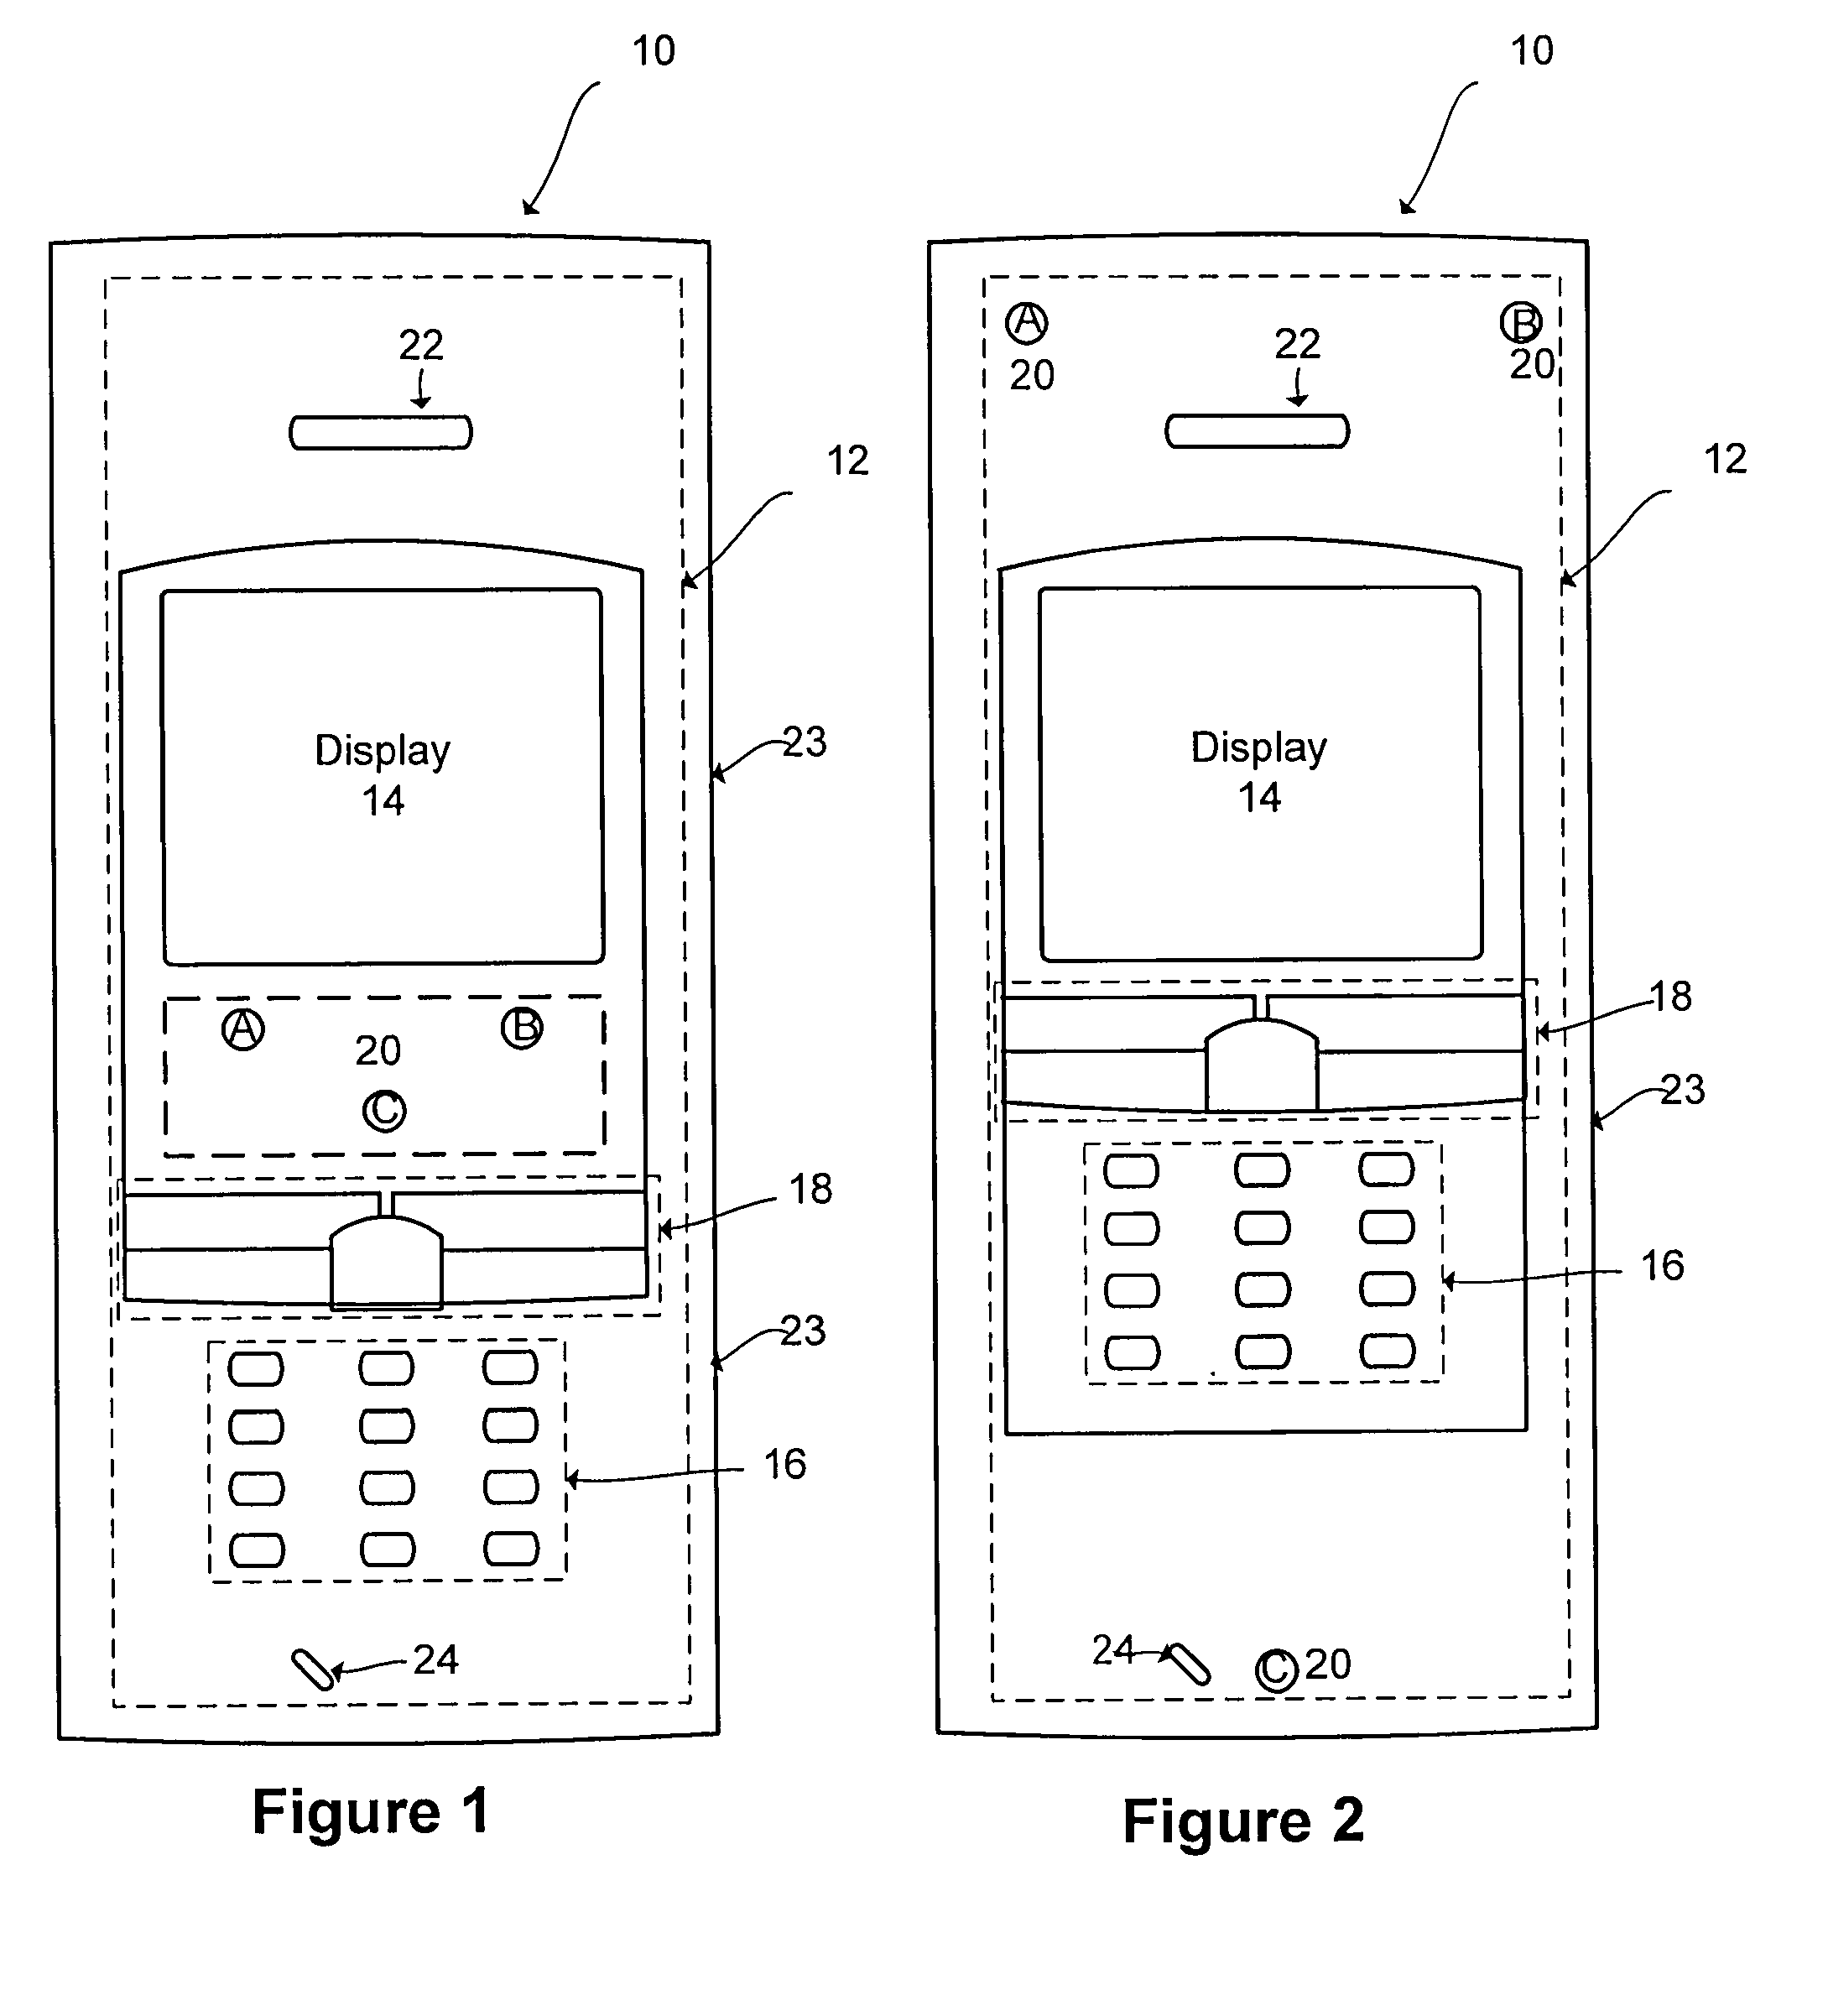 Method and algorithm for detecting movement of an object